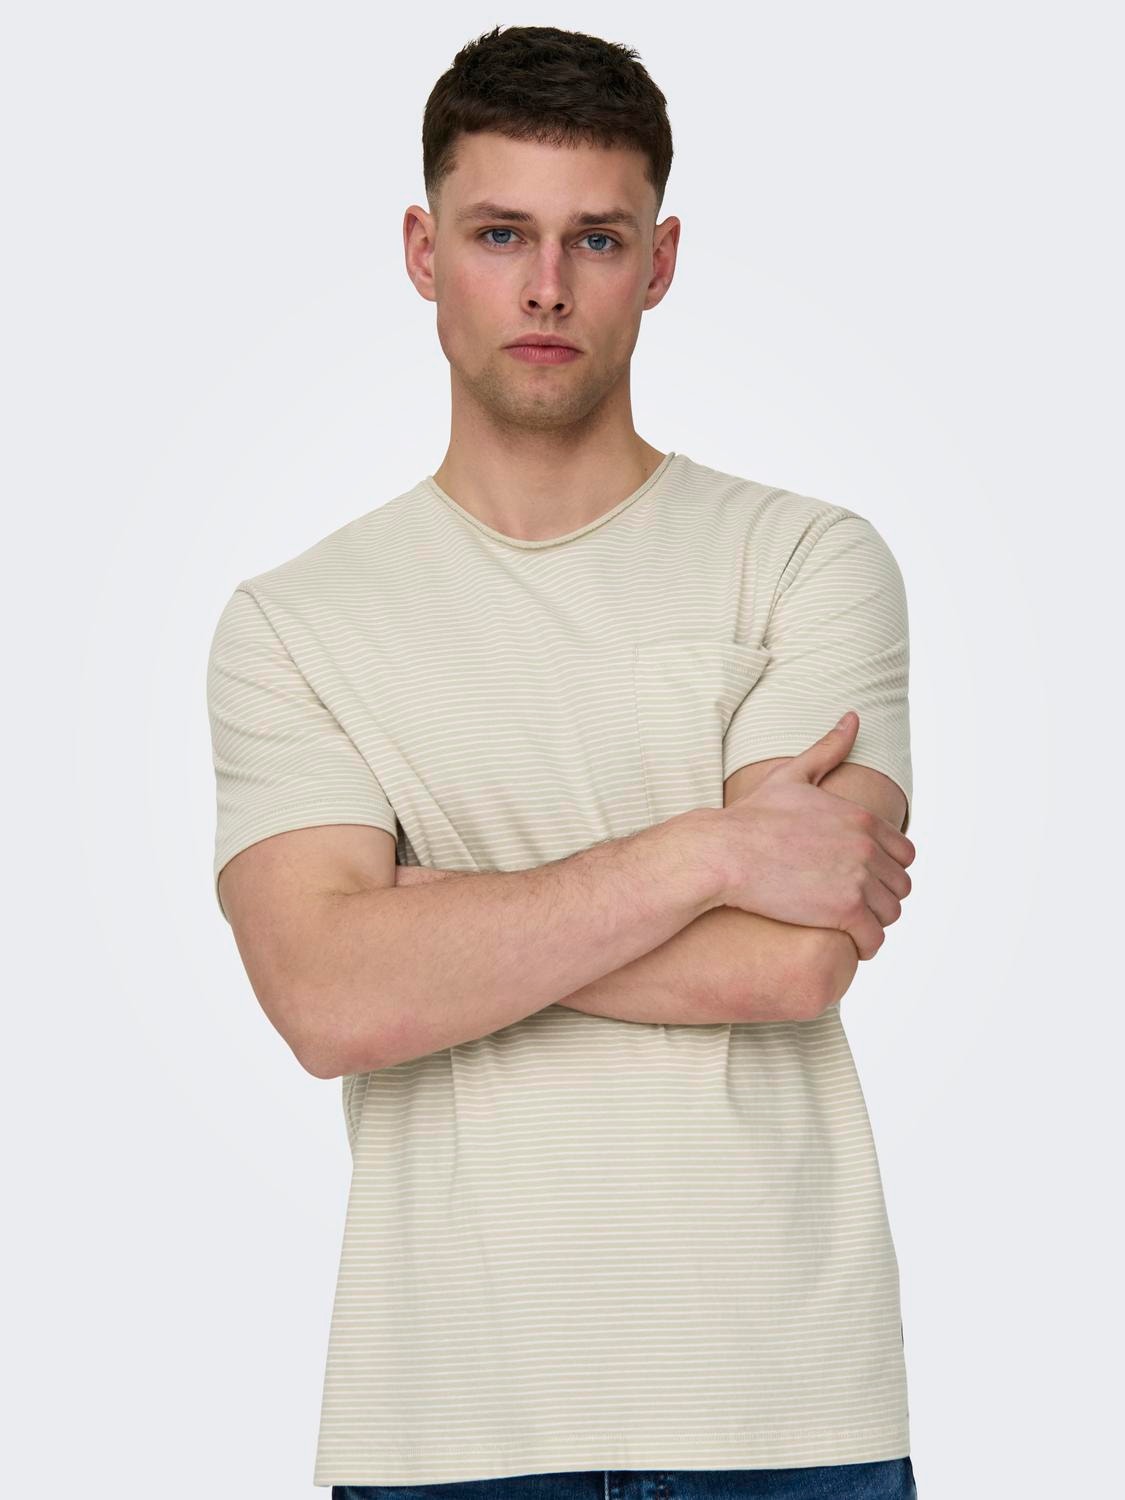 ONLY & SONS Regular fit O-hals T-shirts -White - 22025680